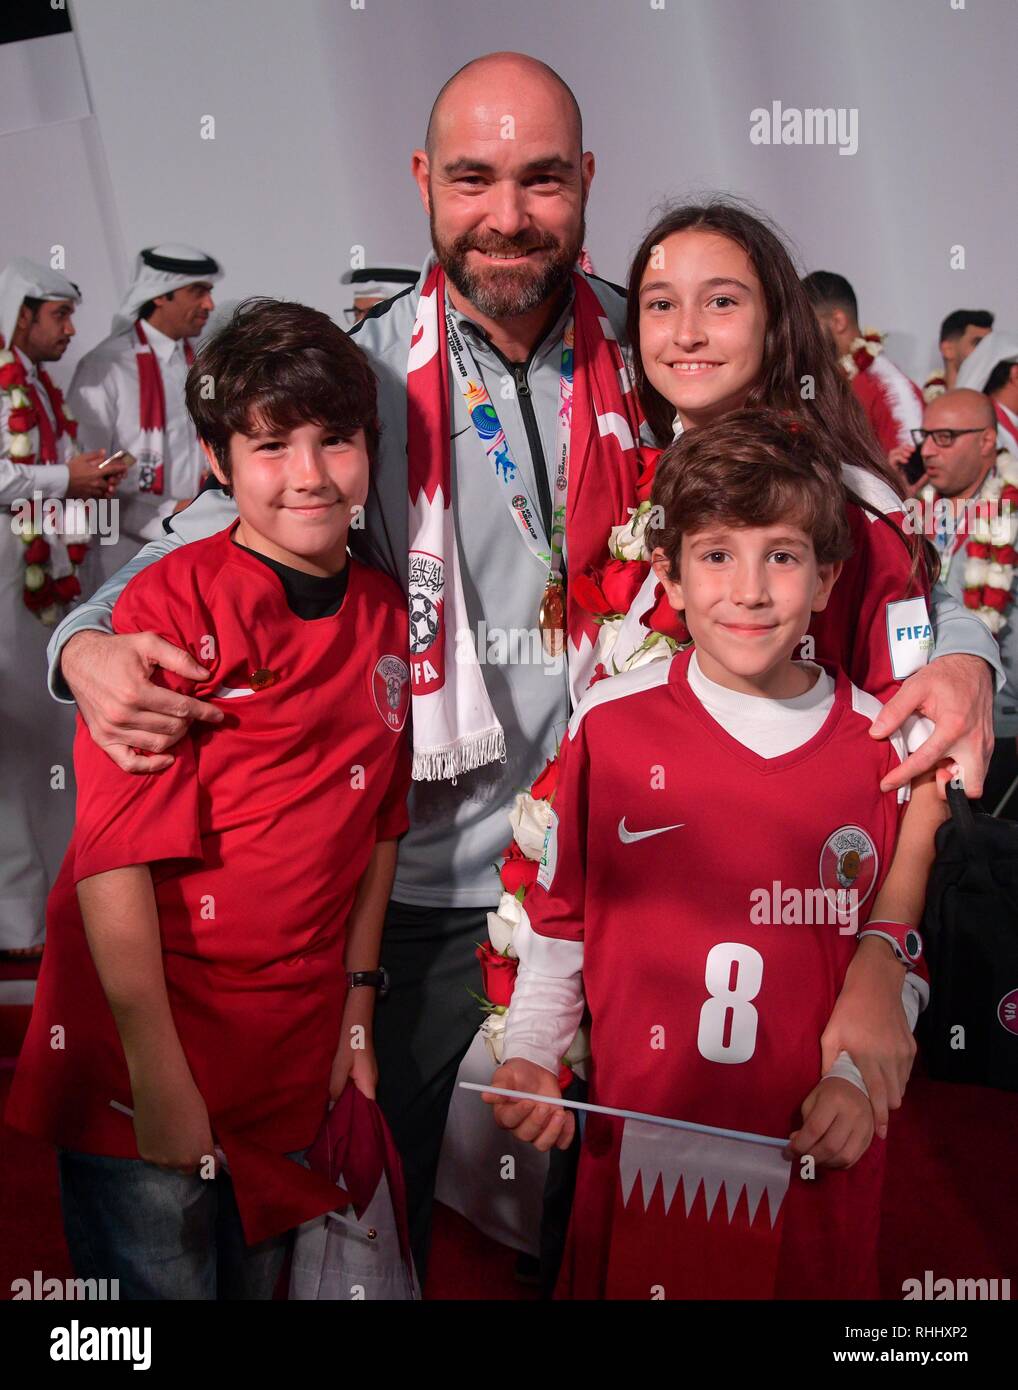 Doha, Qatar. . 2nd Feb, 2019. Qatar national soccer team coach Felix Sanchez  Bas of Spain poses with his children for a photo upon arrival at Doha  International Airport in Doha, Qatar